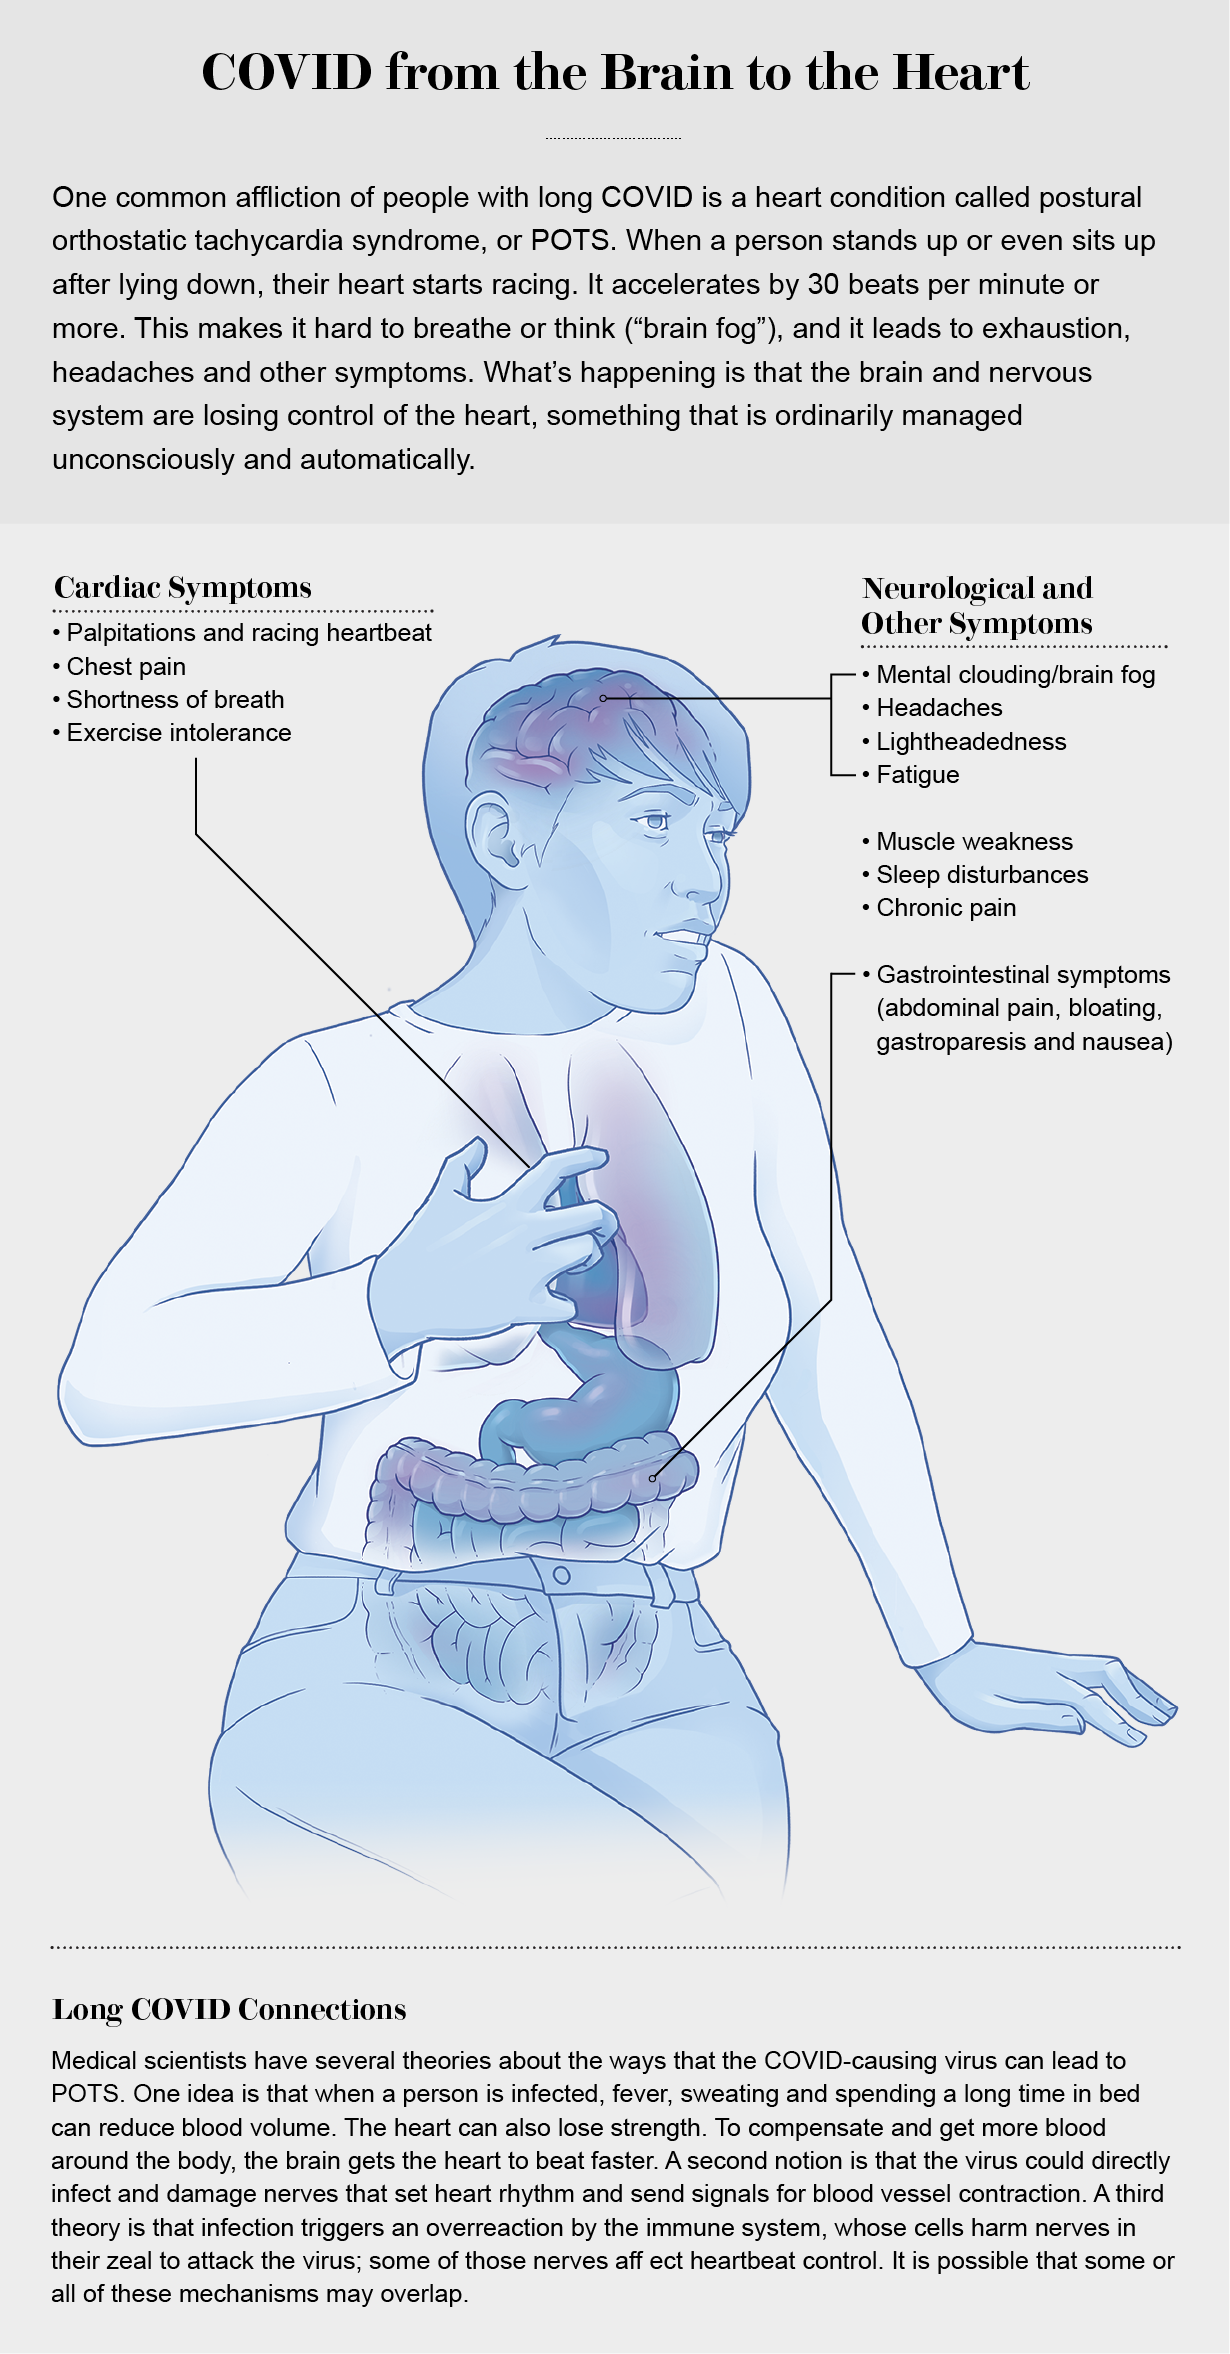 Graphic highlights cardiac, neurological and other types of symptoms associated with long COVID.